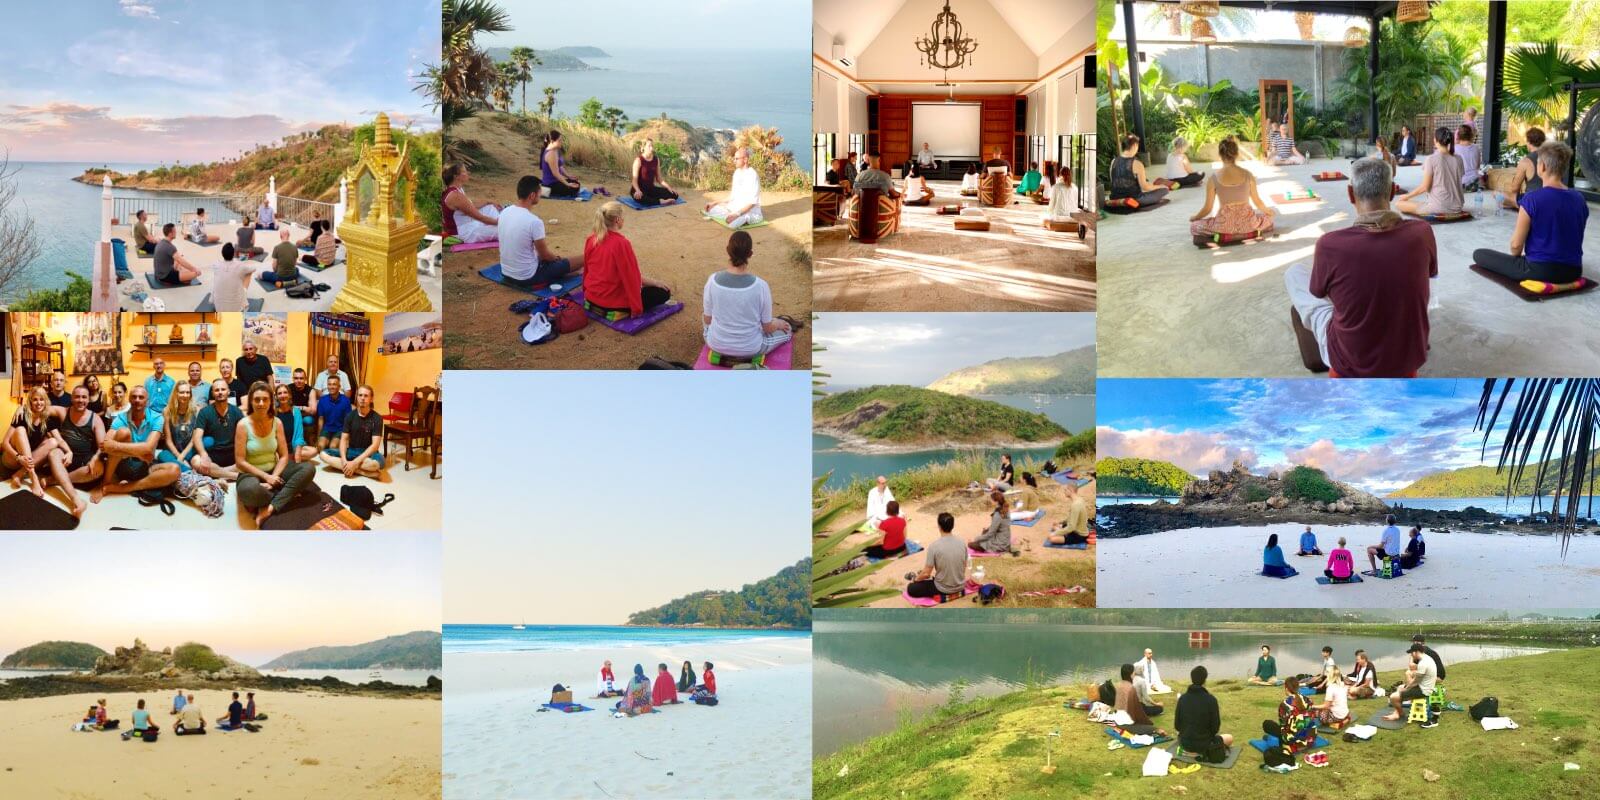 A collection of multiple small images from retreats with groups of people meditating together in nature.